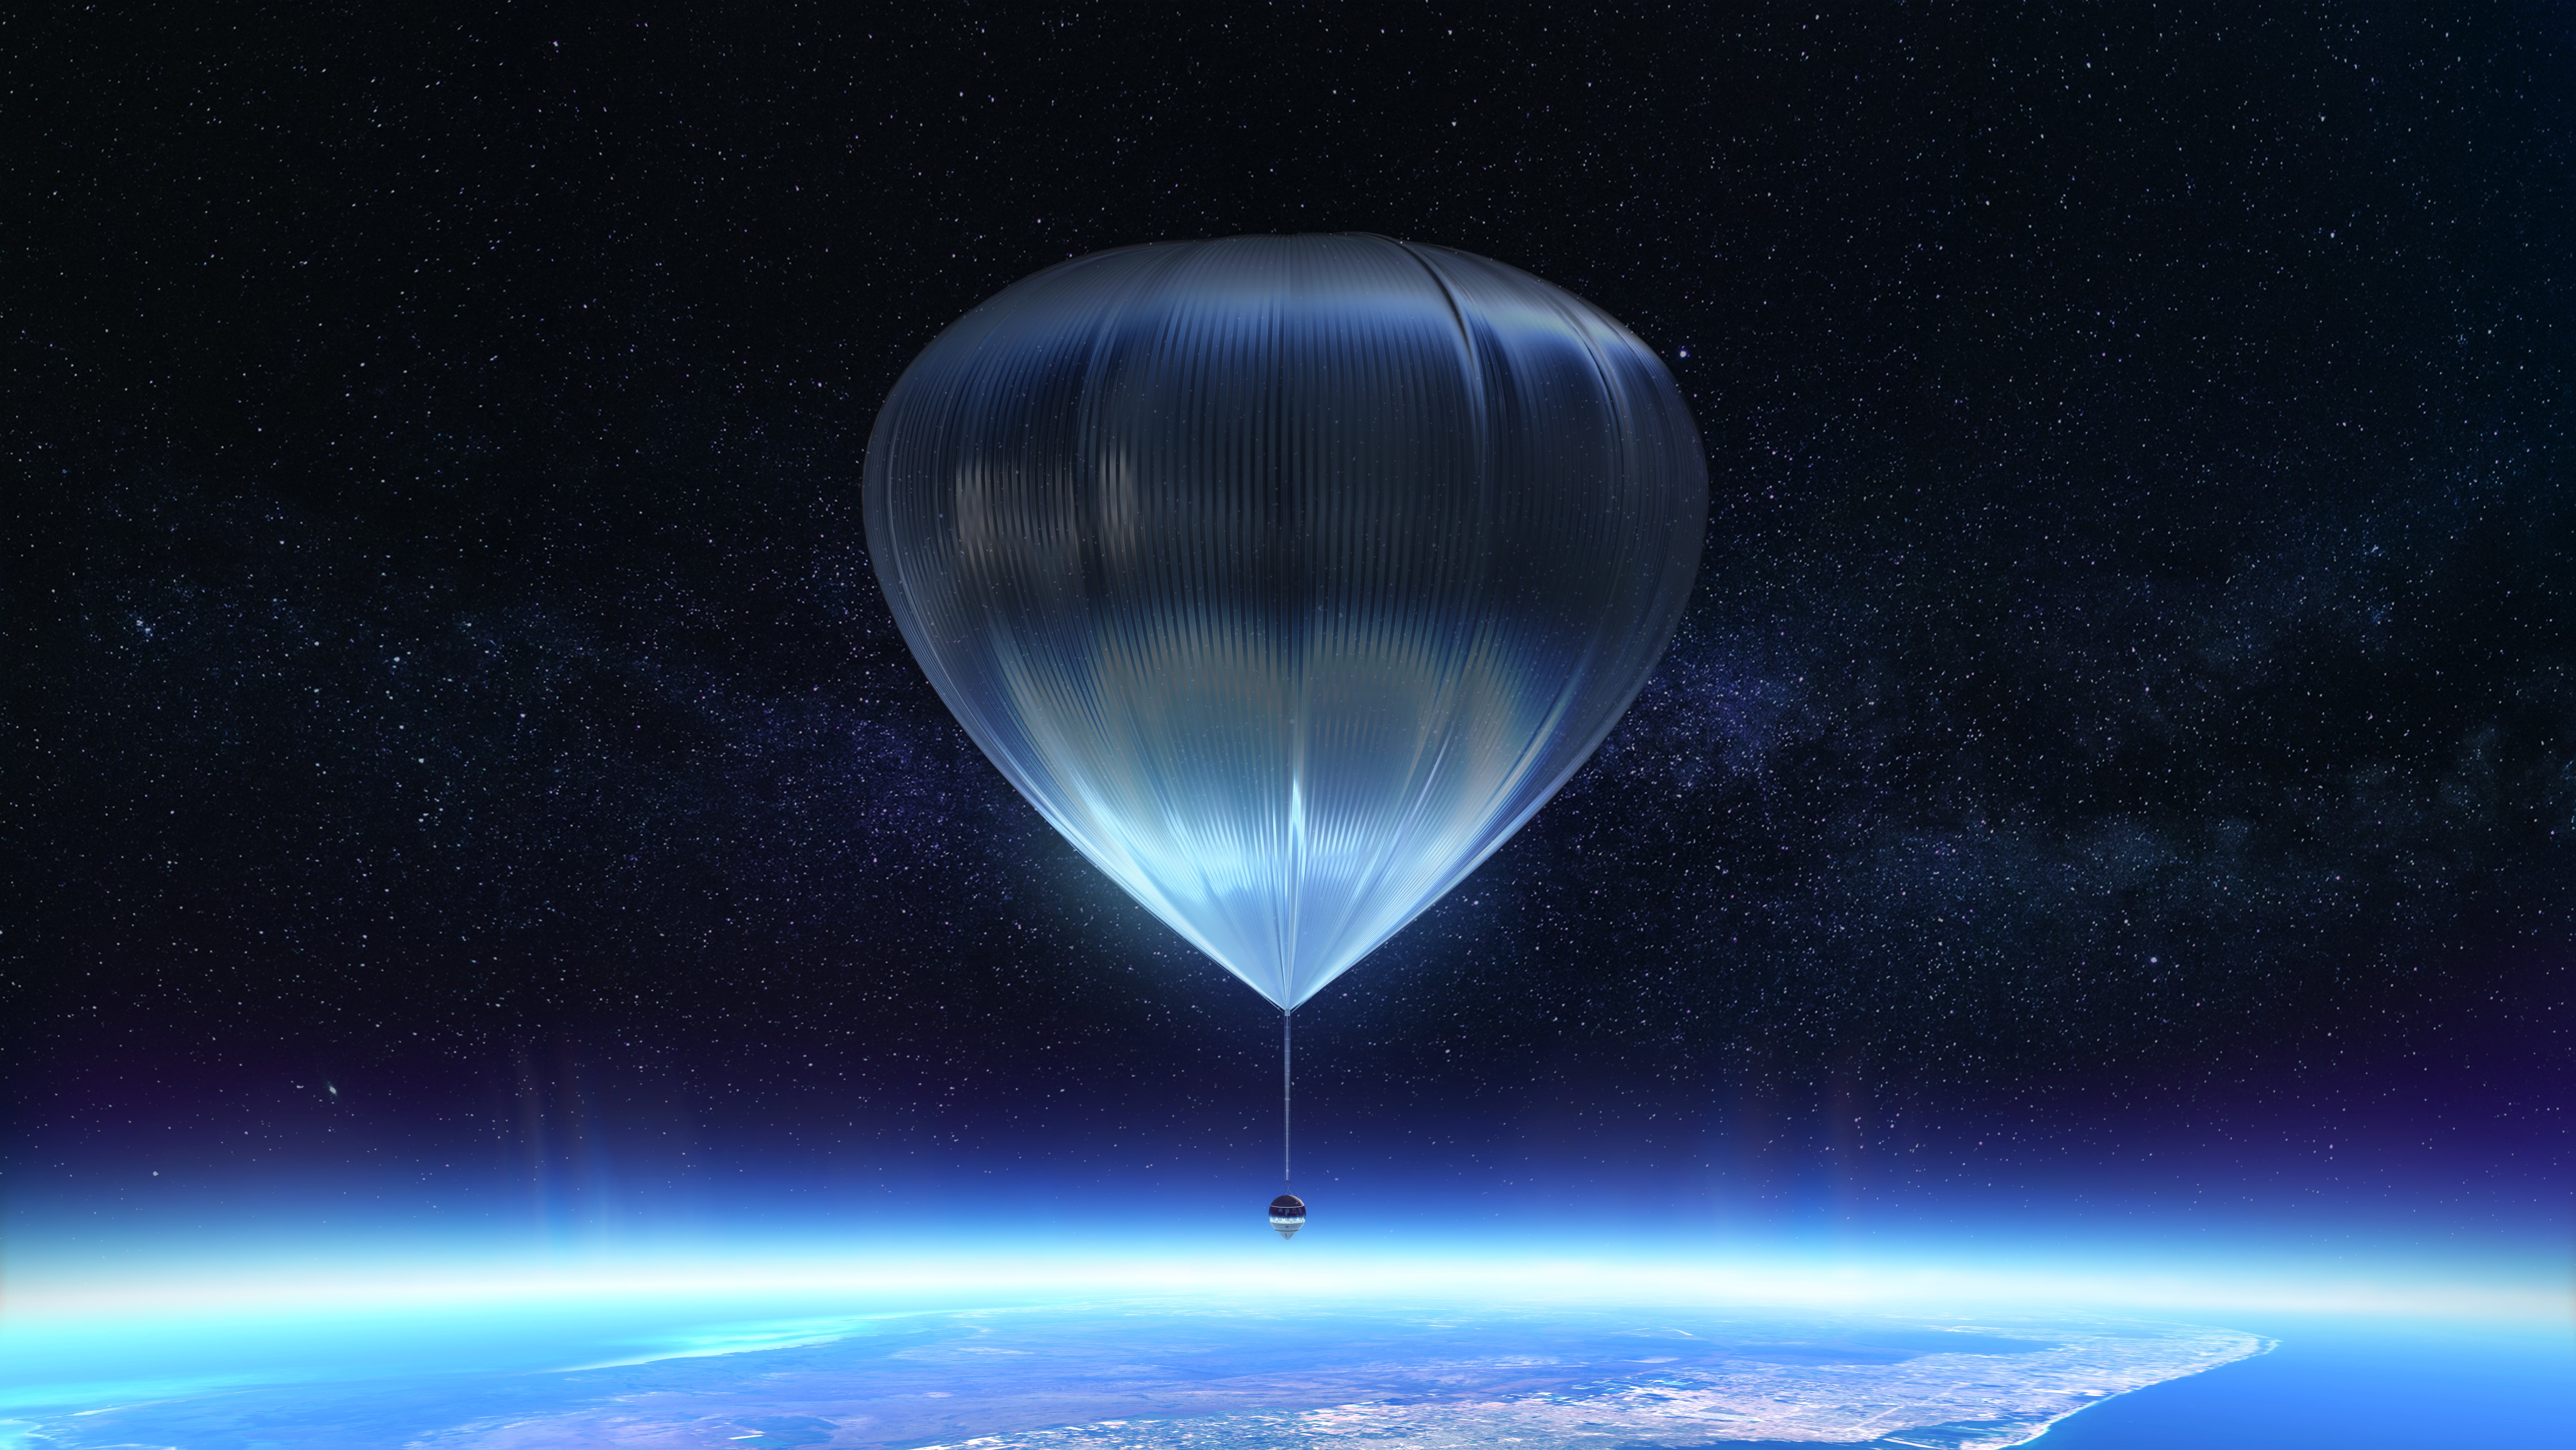 Conceptual view of Spaceship Neptune as it's propelled by the high-altitude balloon. (Image: Space Perspective)